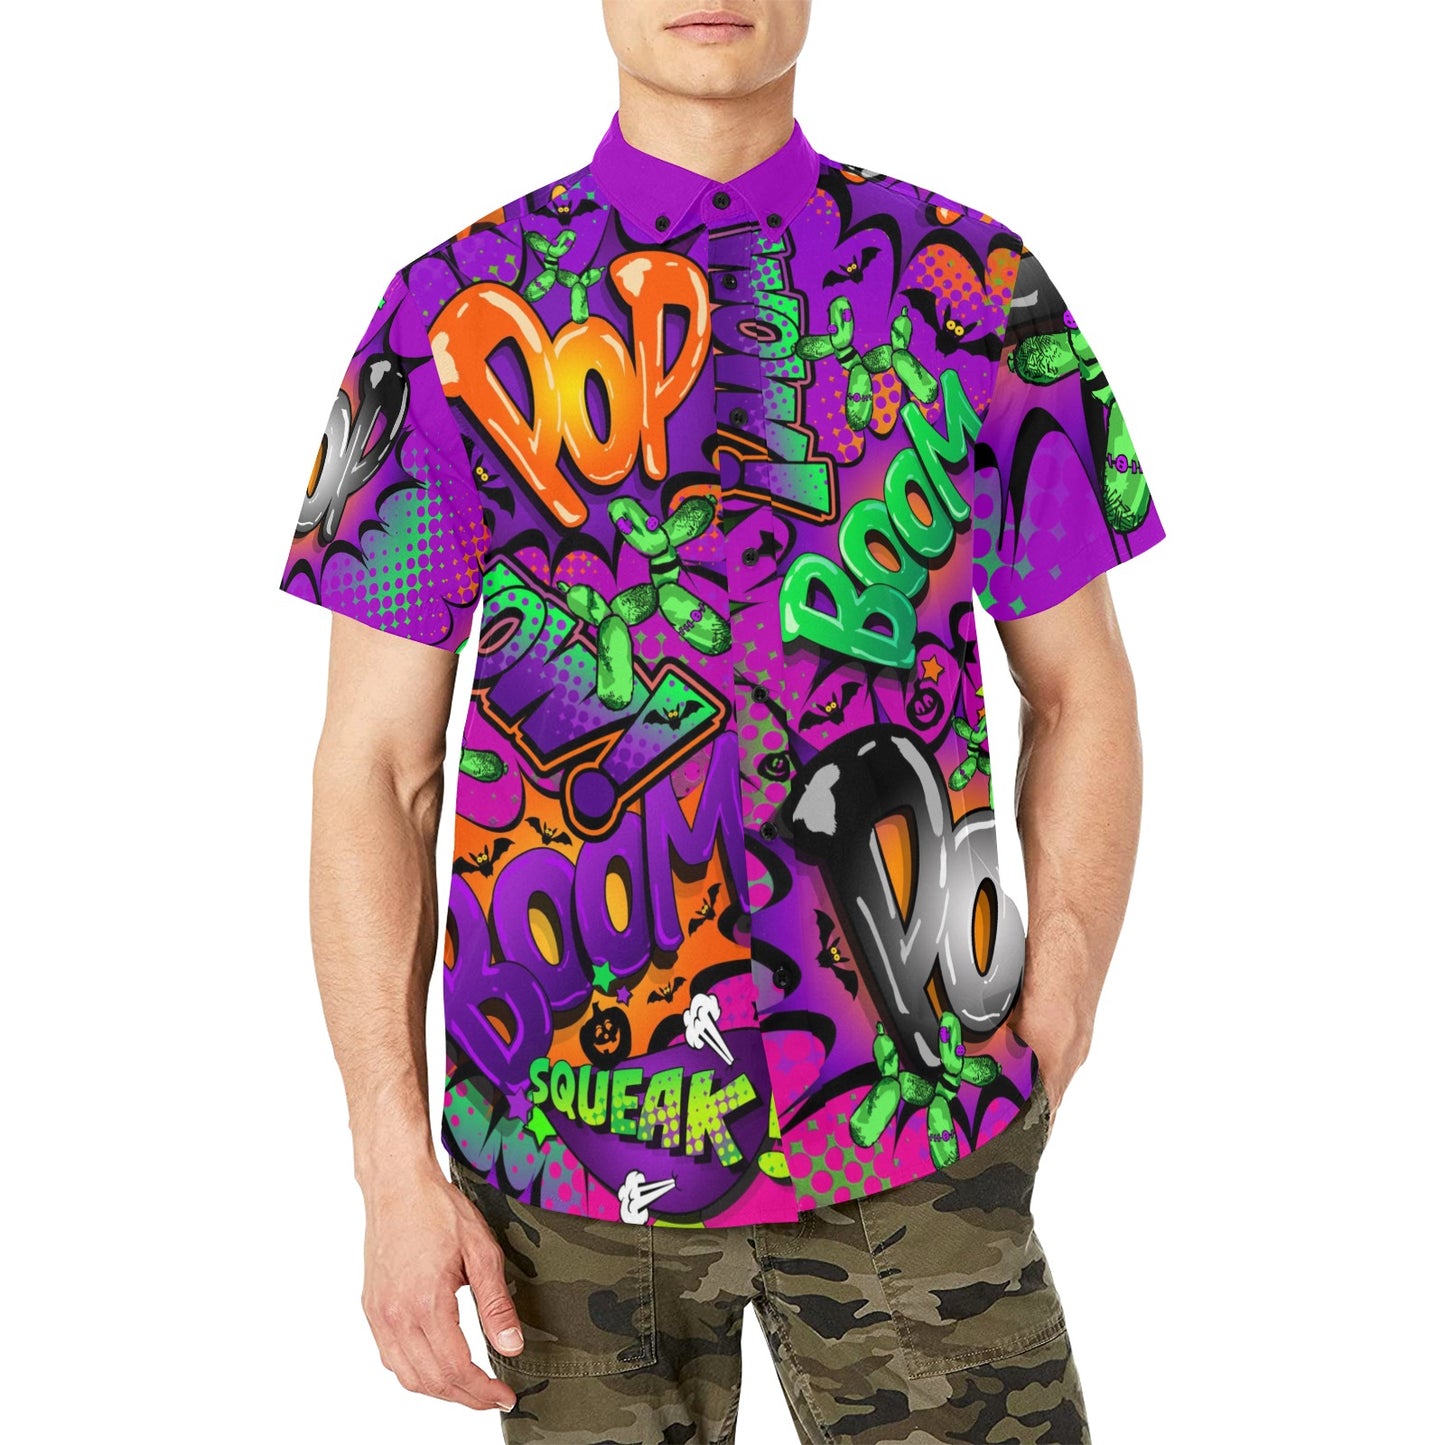 Purple Halloween Theme shirt for Balloon twisters and face painters